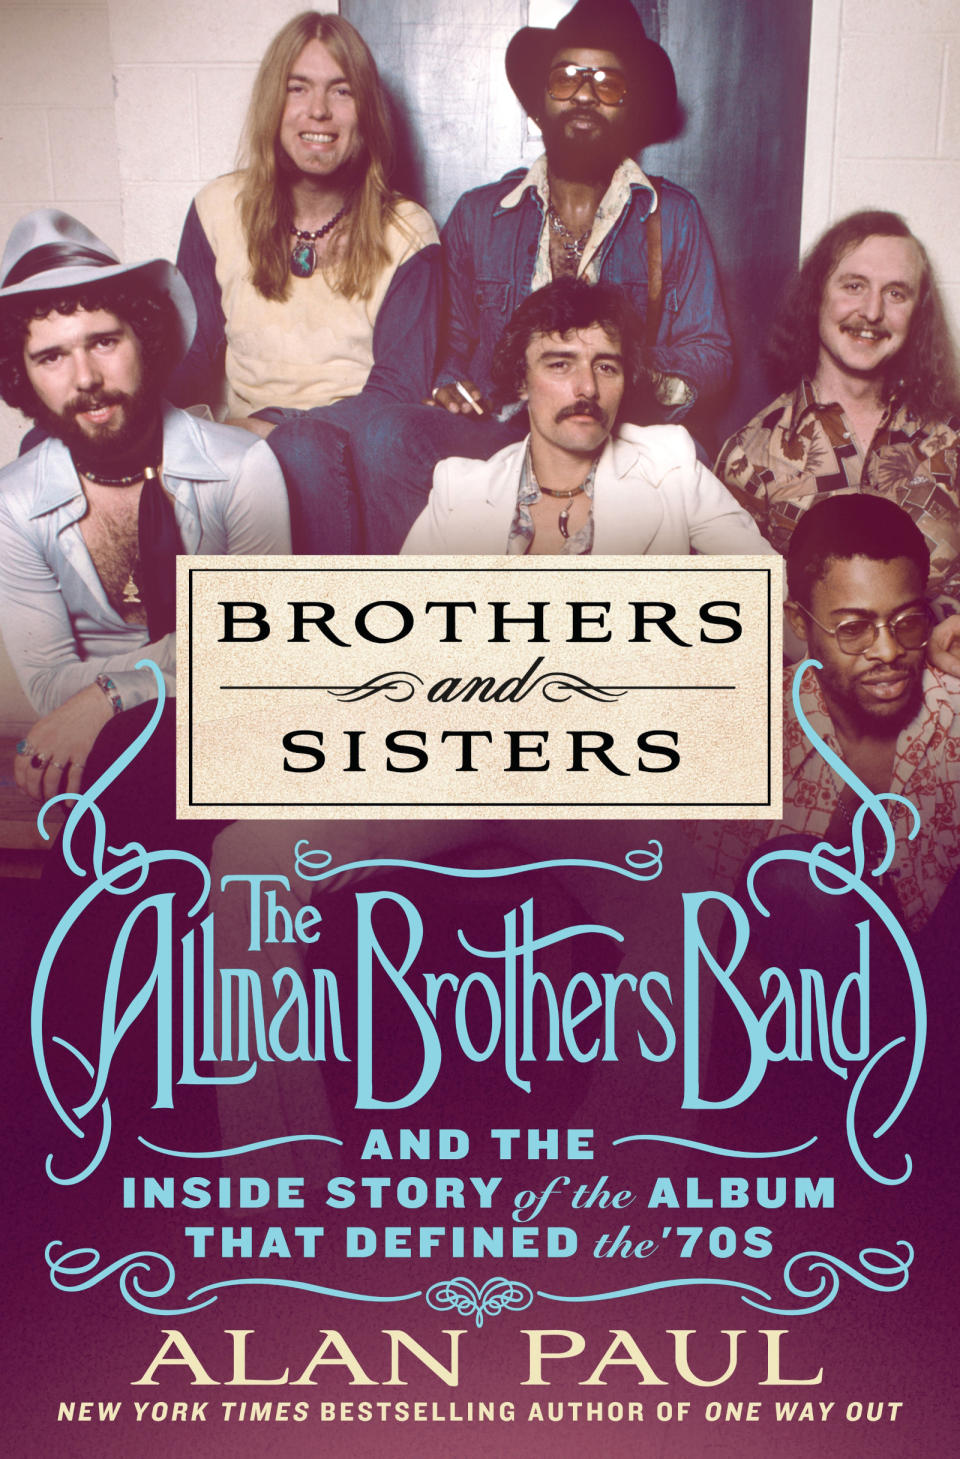 Alan Paul’s 'Brothers and Sisters: The Allman Brothers Band and the Inside Story of the Album That Defined the ’70s'